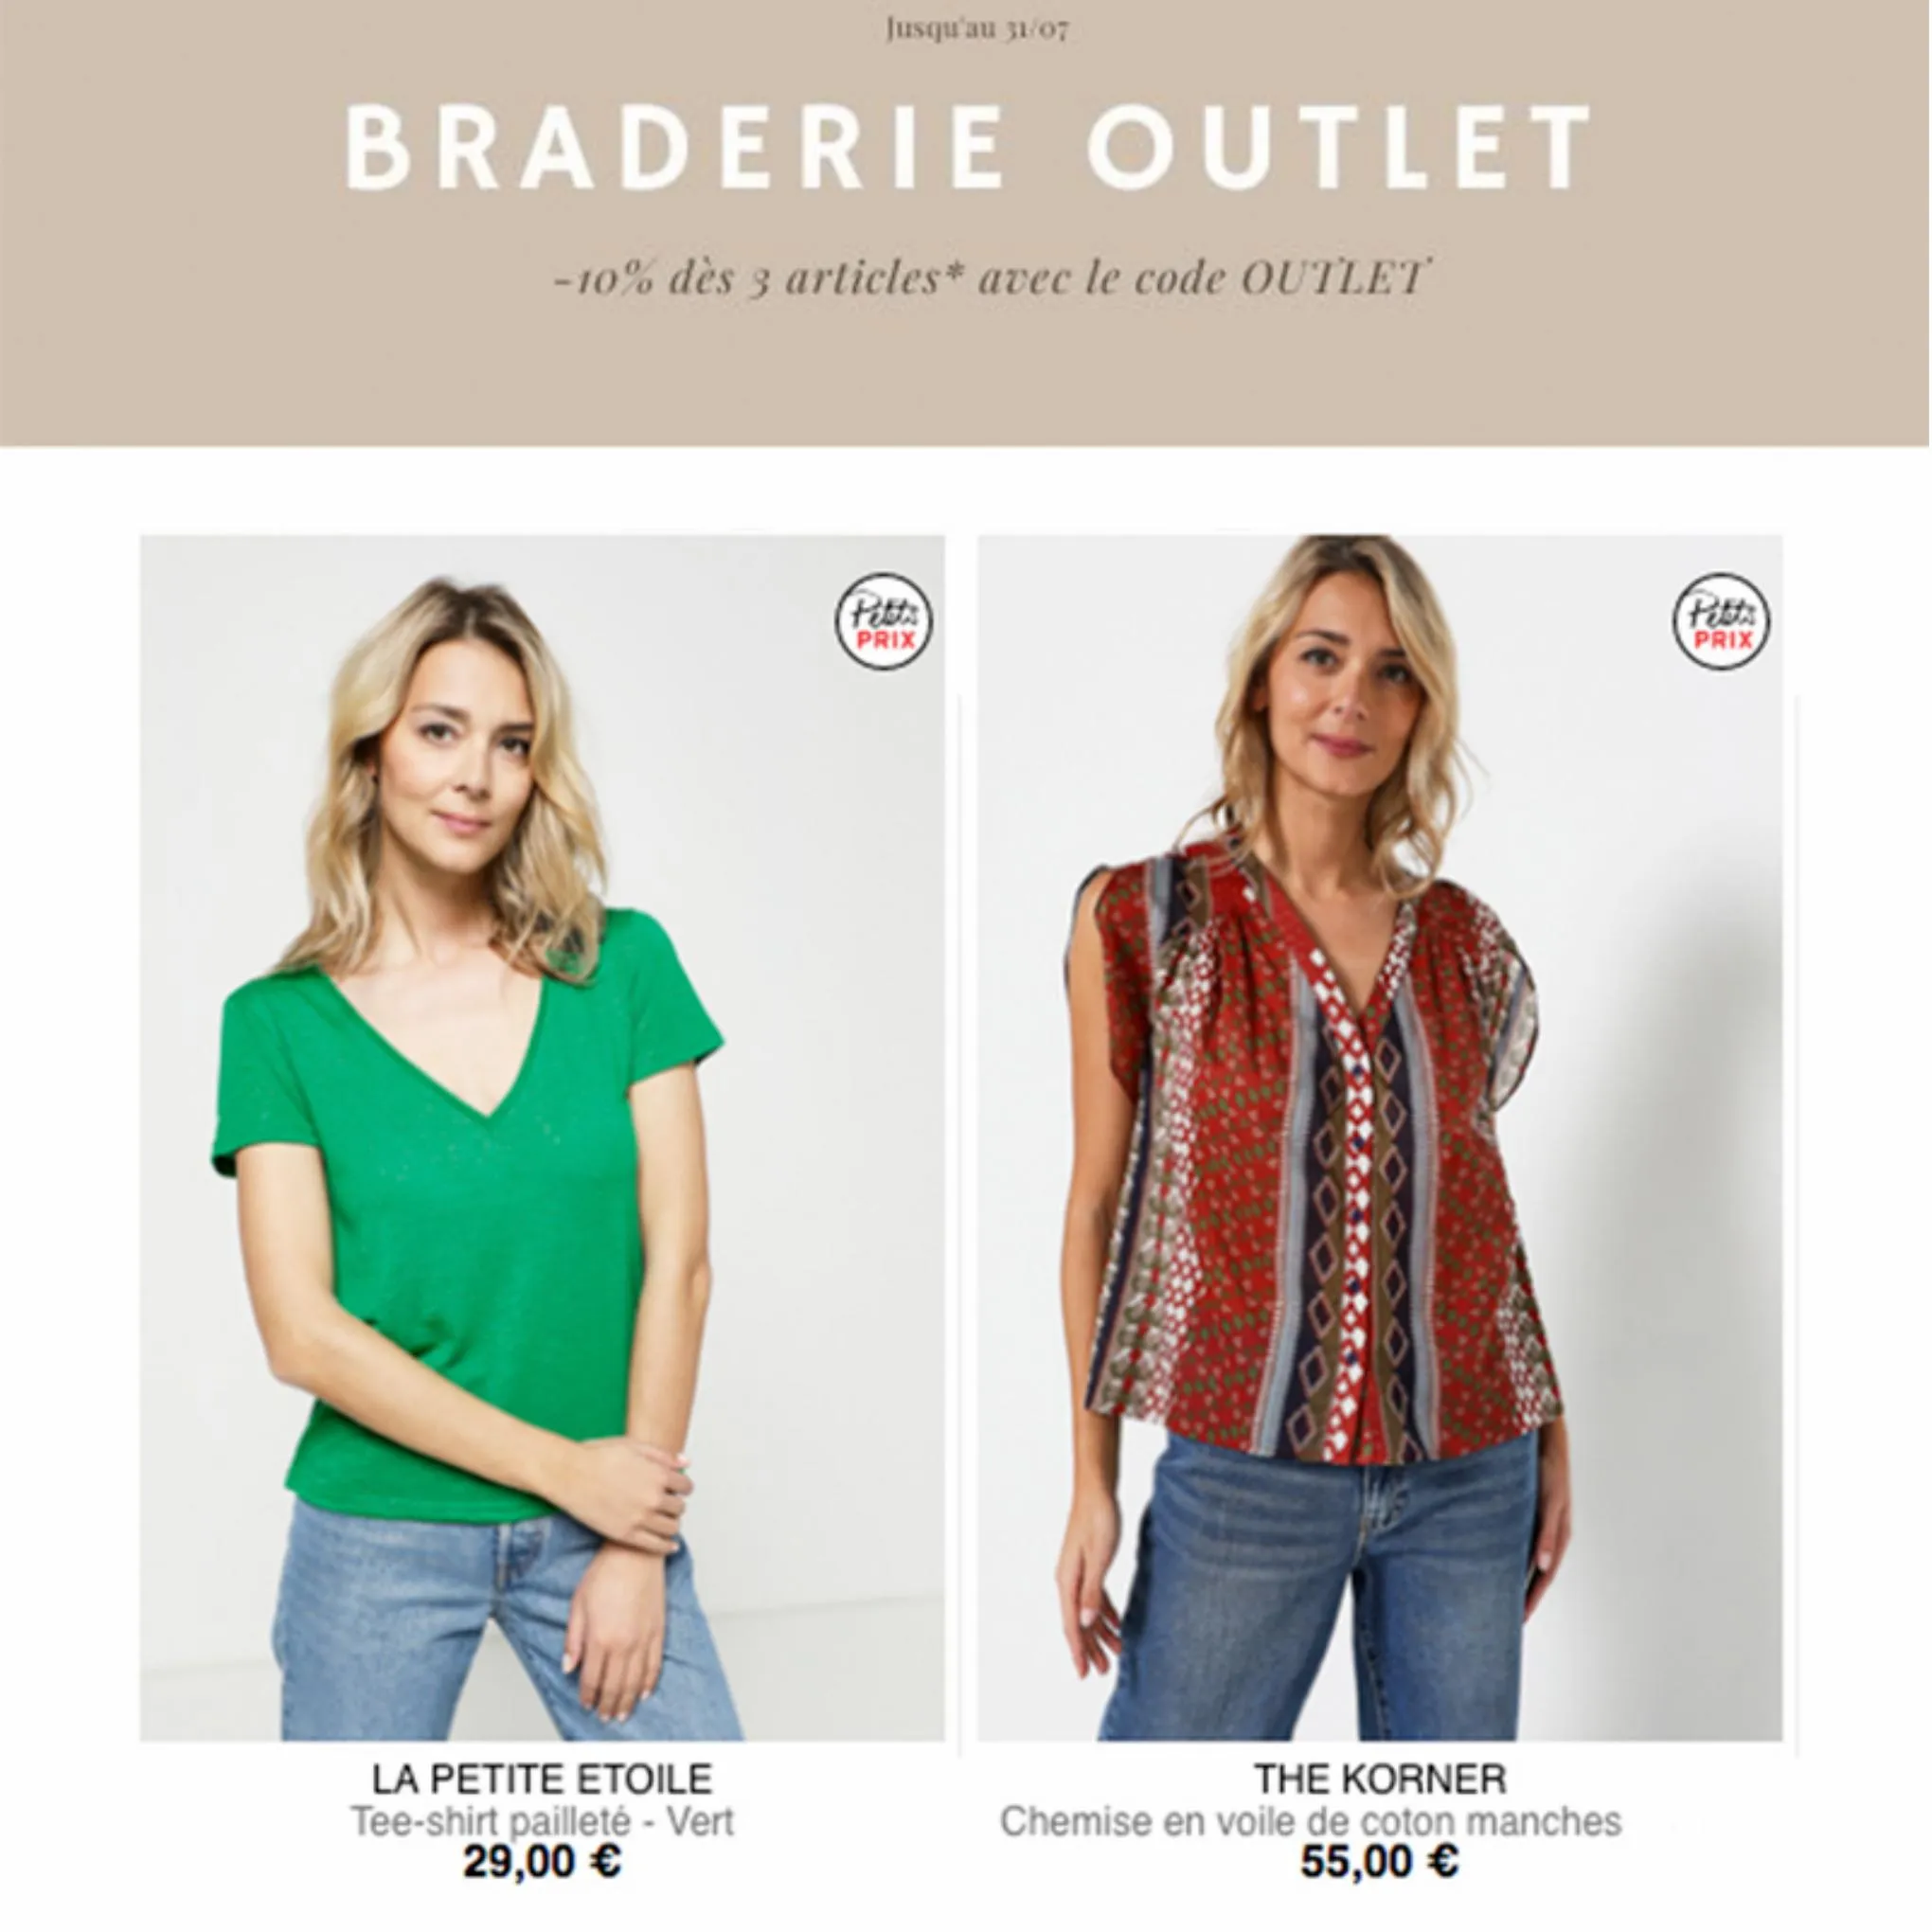 Catalogue Braderie Outlet, page 00002